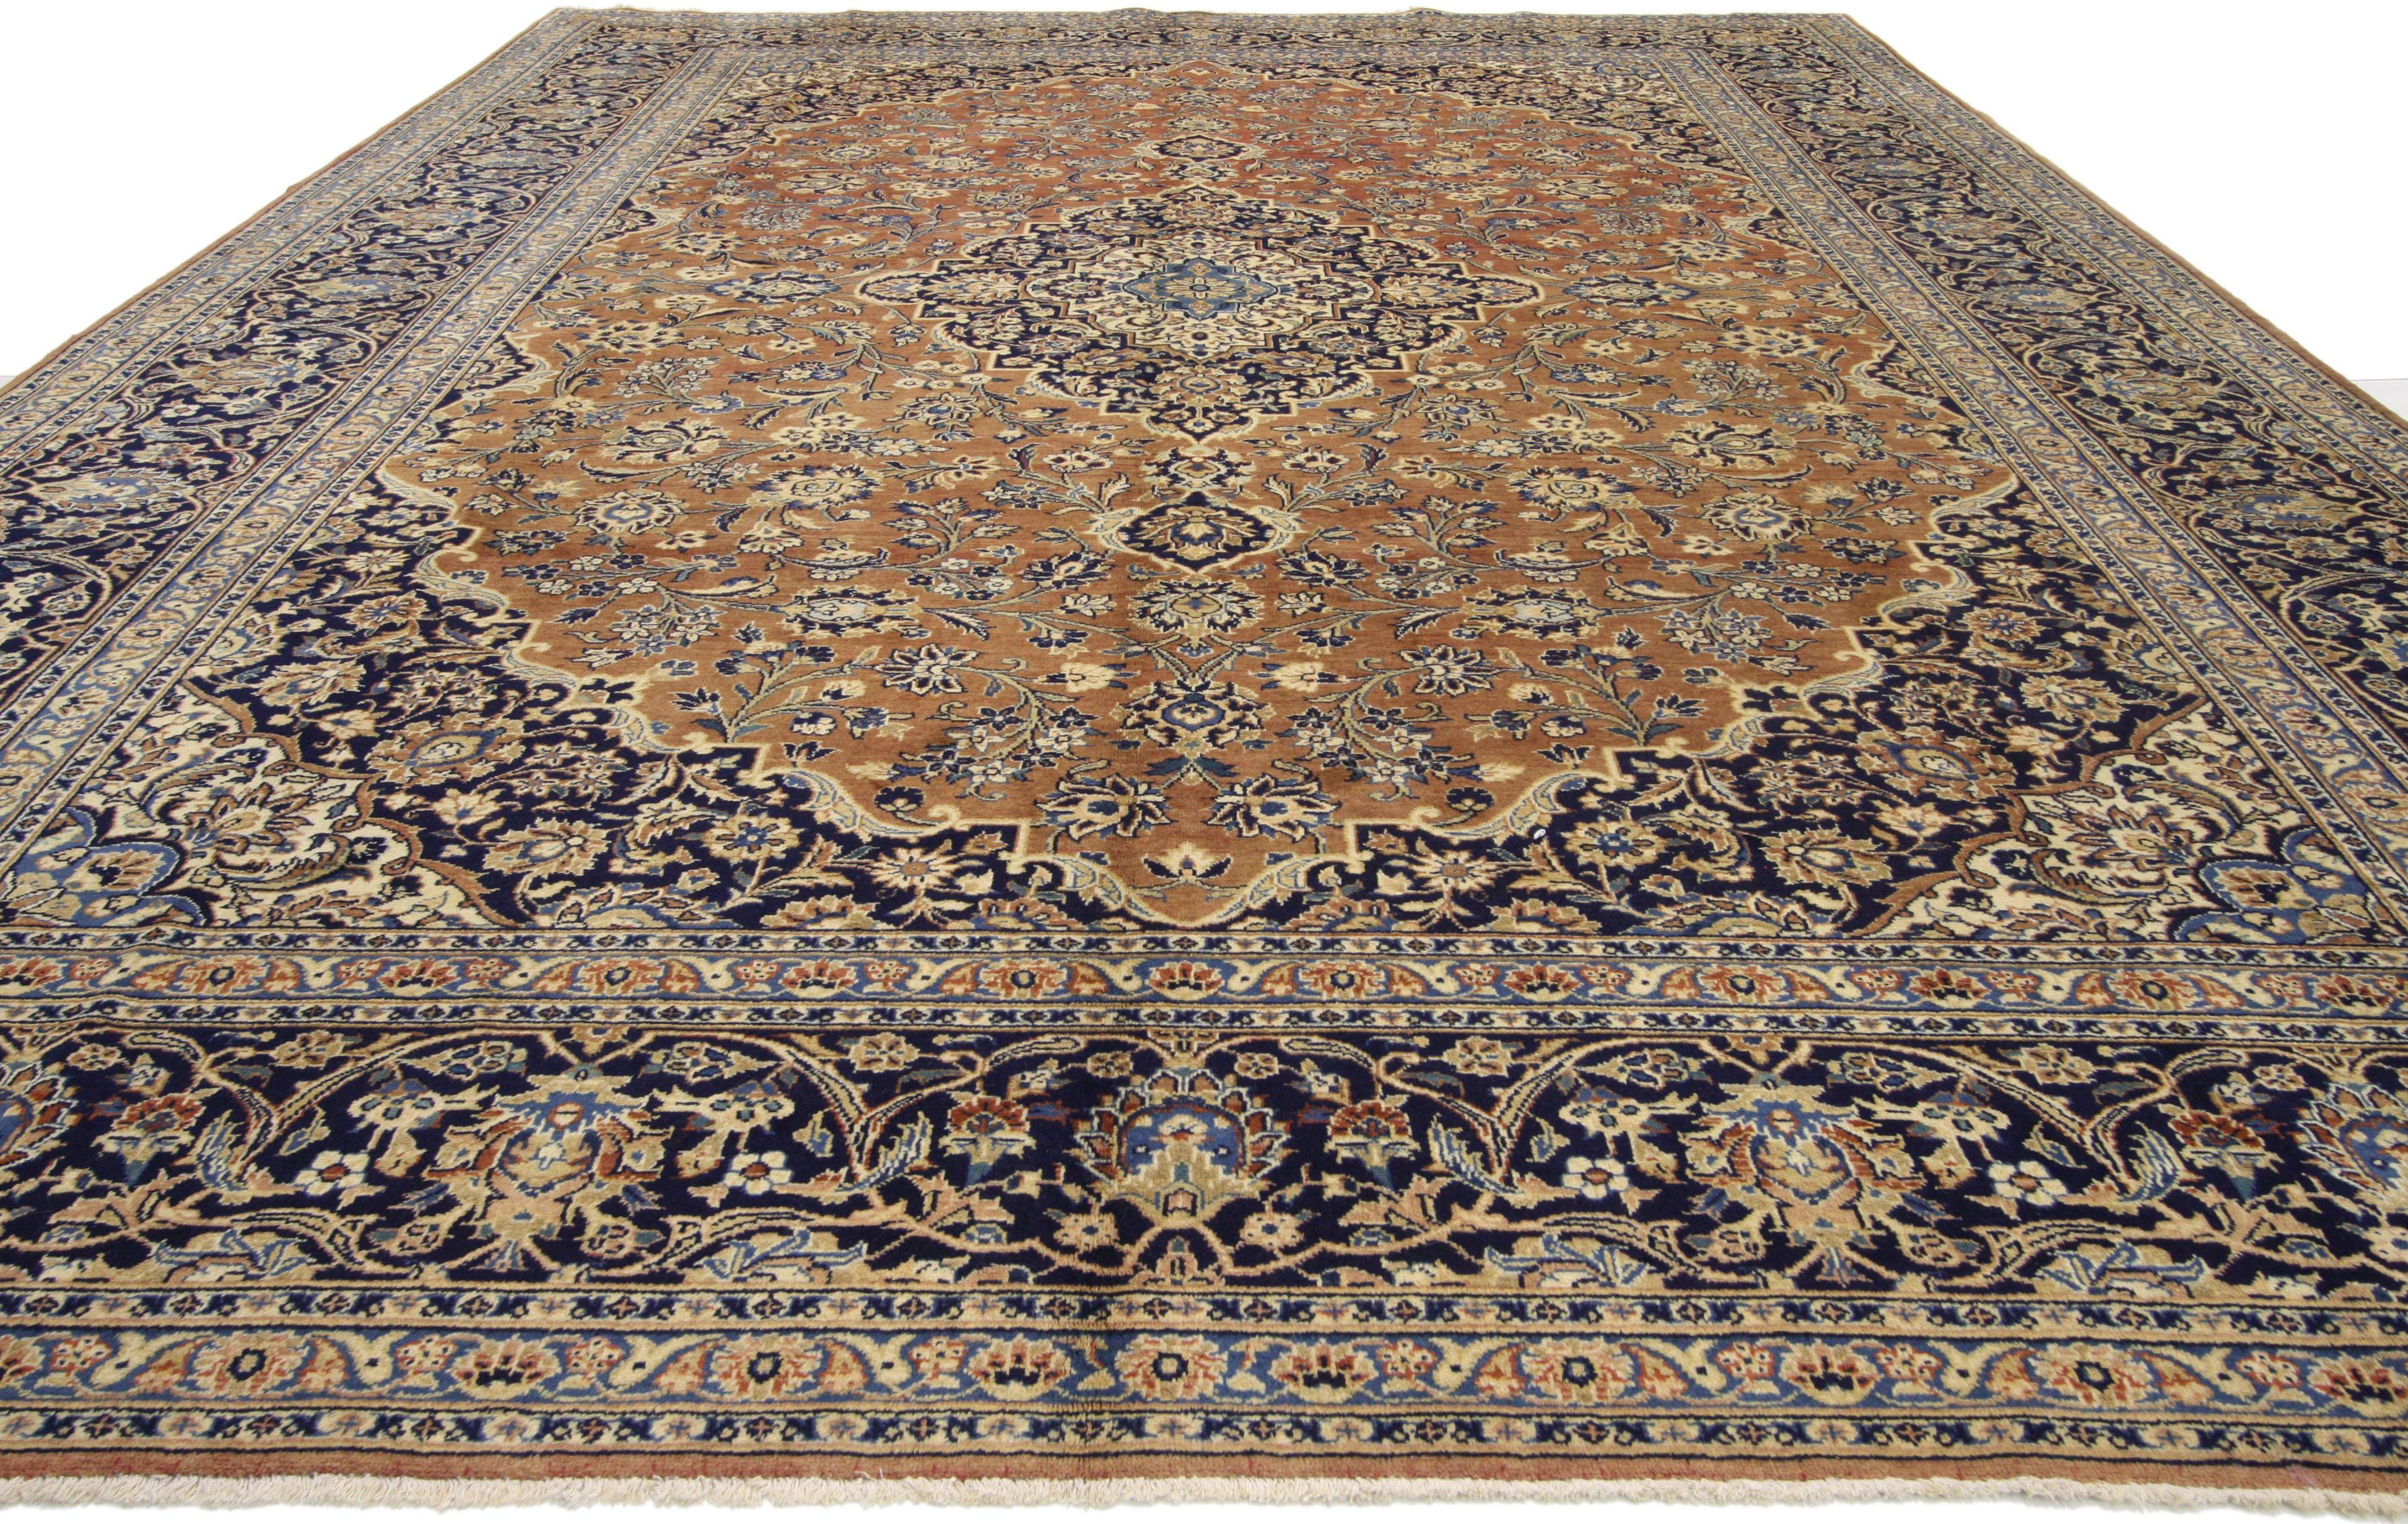 76325, vintage Persian Kashan area rug with traditional style. This hand-knotted wool vintage Persian Kashan area rug with traditional style features a lobed and stepped tricolor diamond medallion flanked with palmette finials surrounded by an